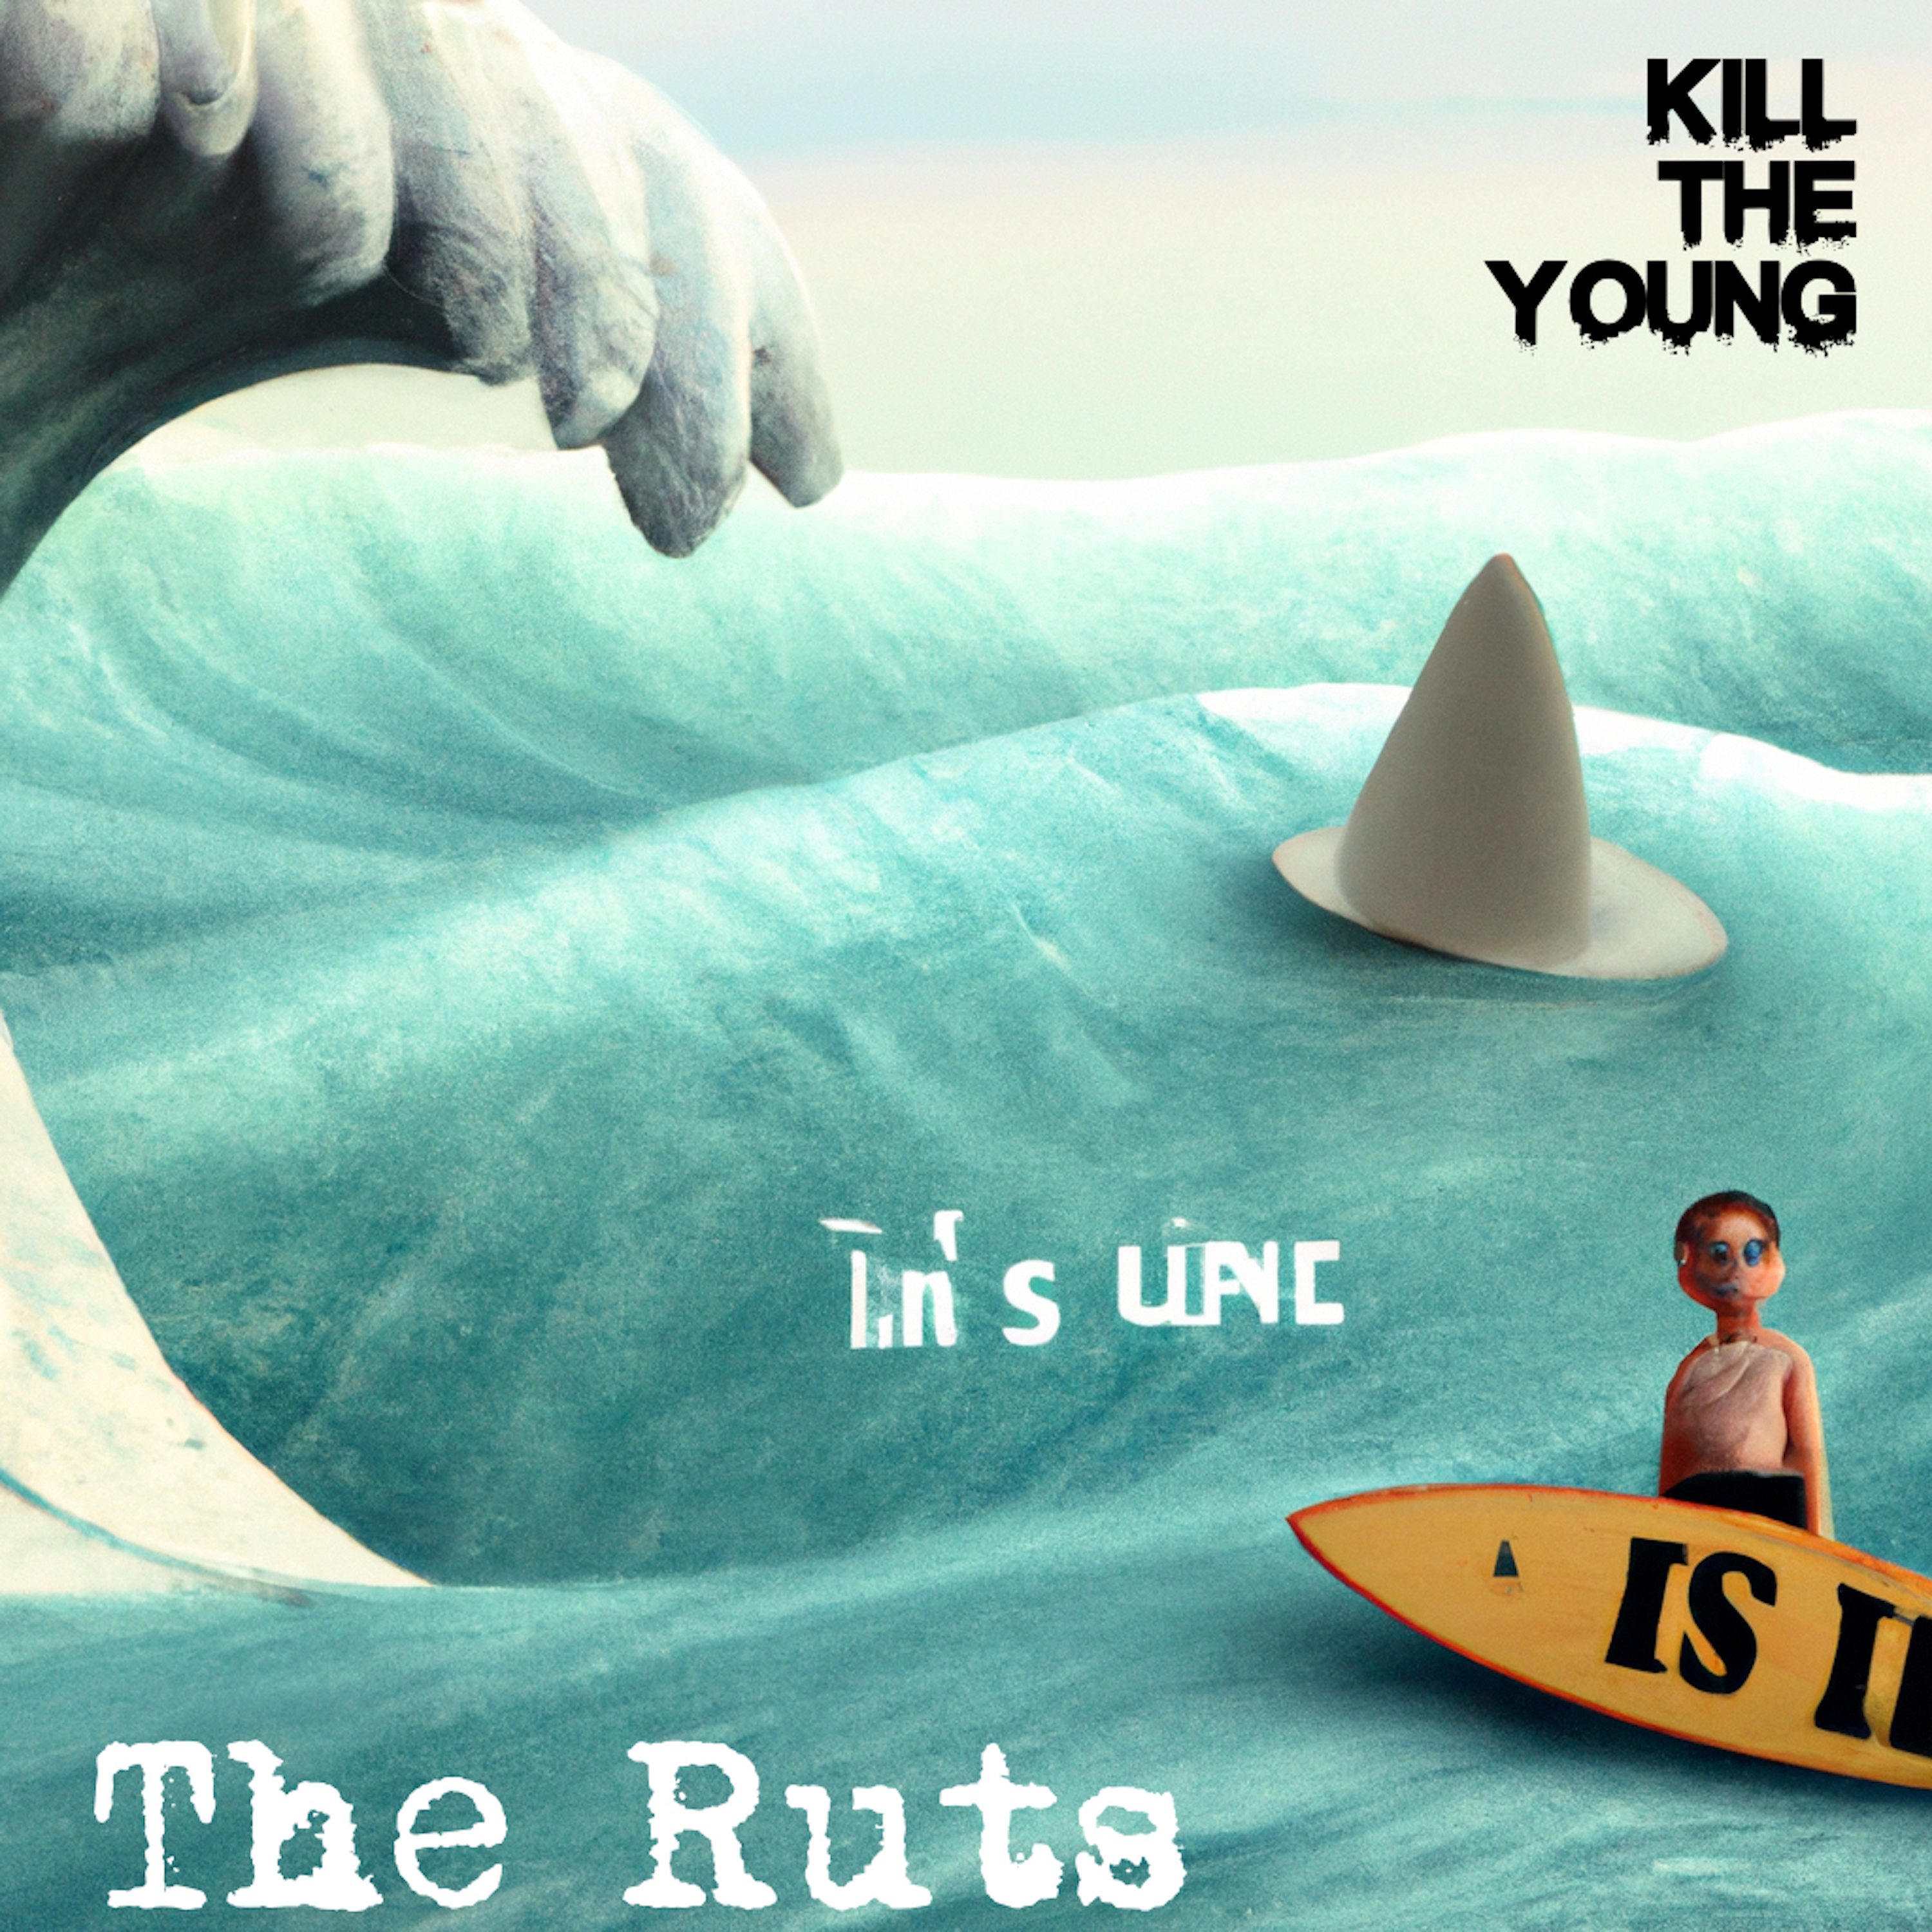 AI art of waves and surfer, writing says kill the young The Ruts